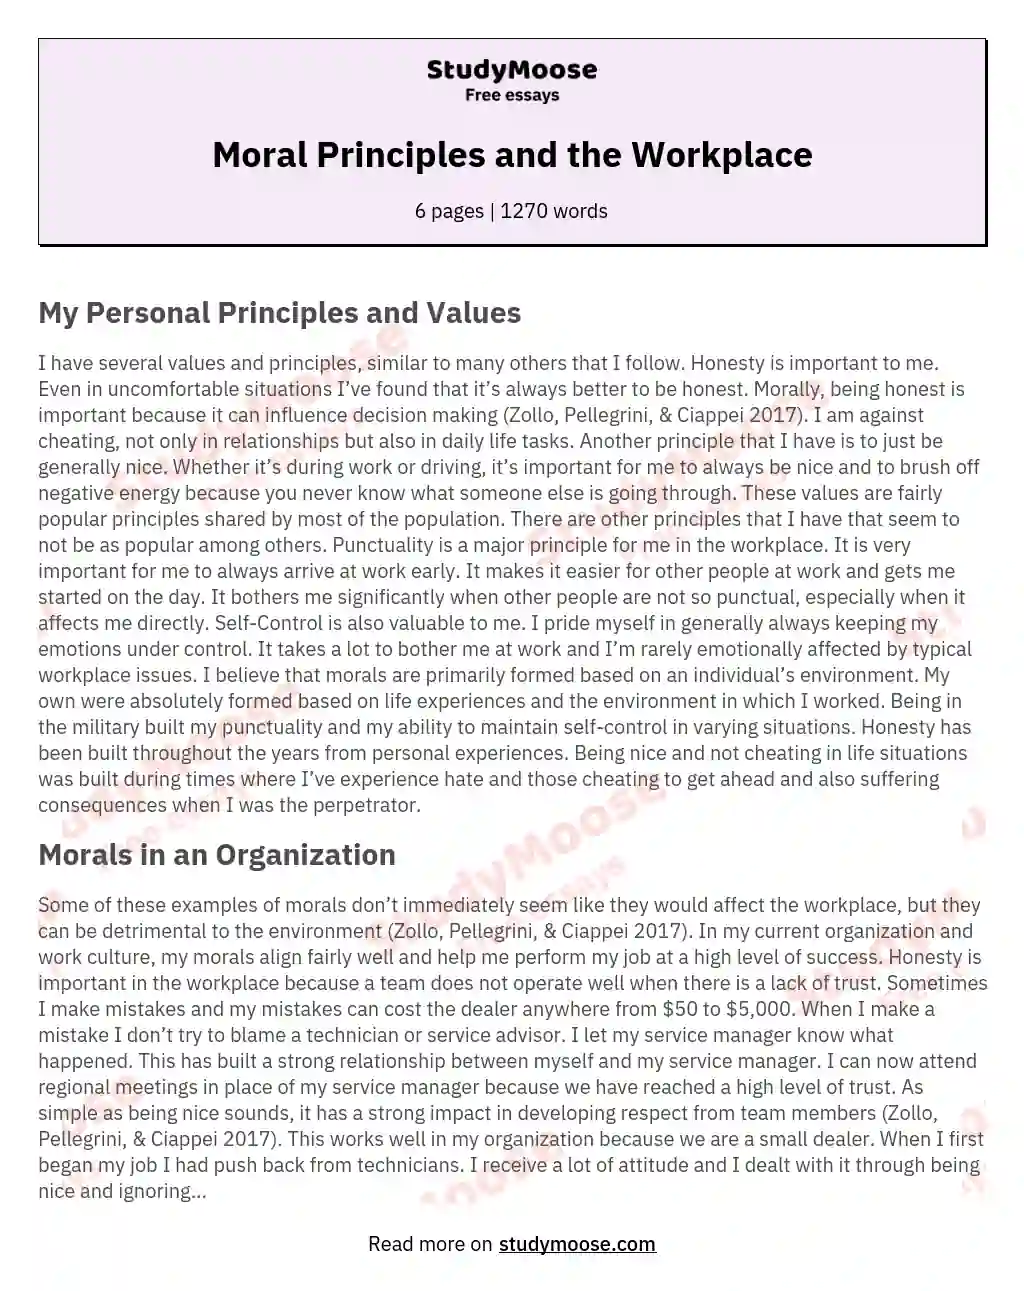 Moral Principles and the Workplace essay